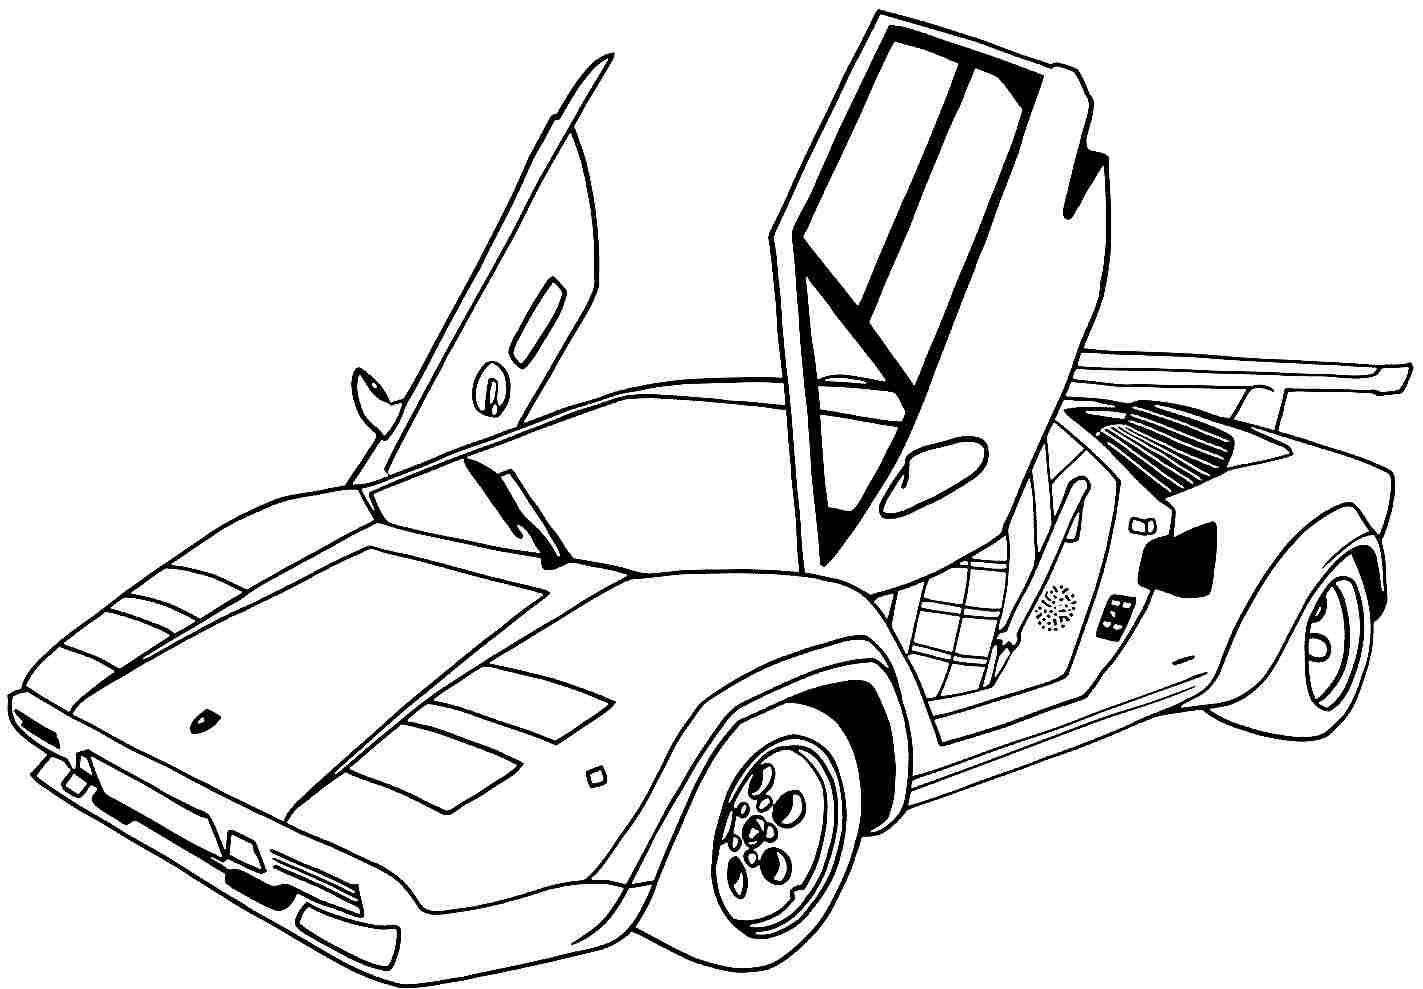 Bugatti Veyron Coloring Pages at GetColorings.com | Free ...